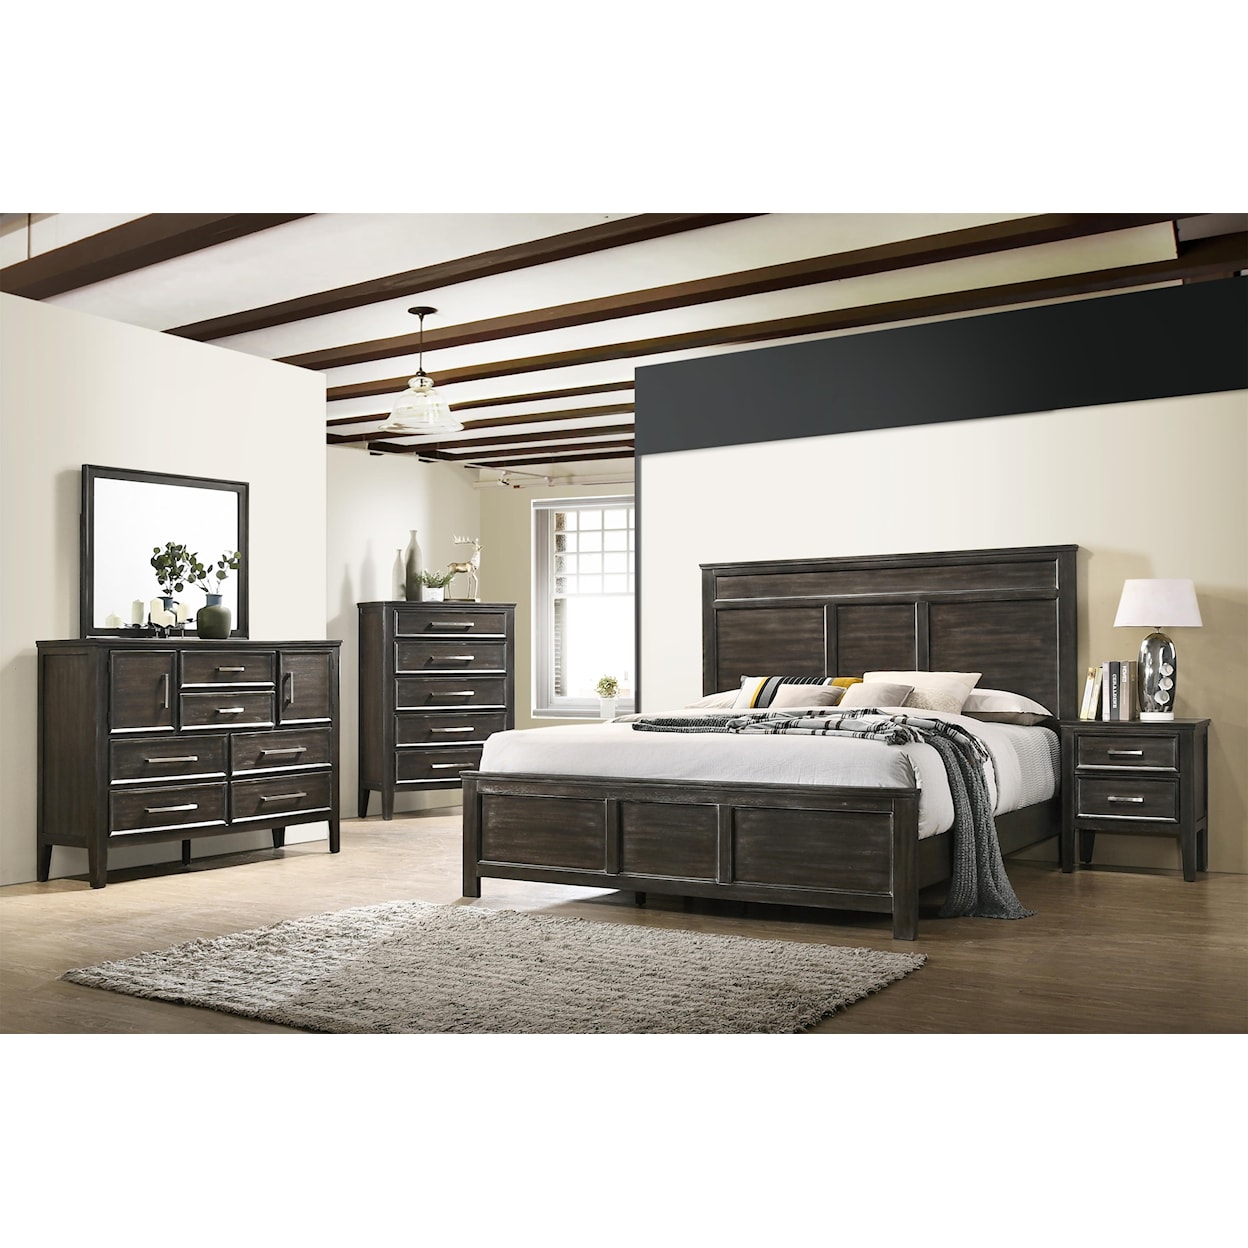 New Classic Andover 6 Piece Twin Bedroom Group